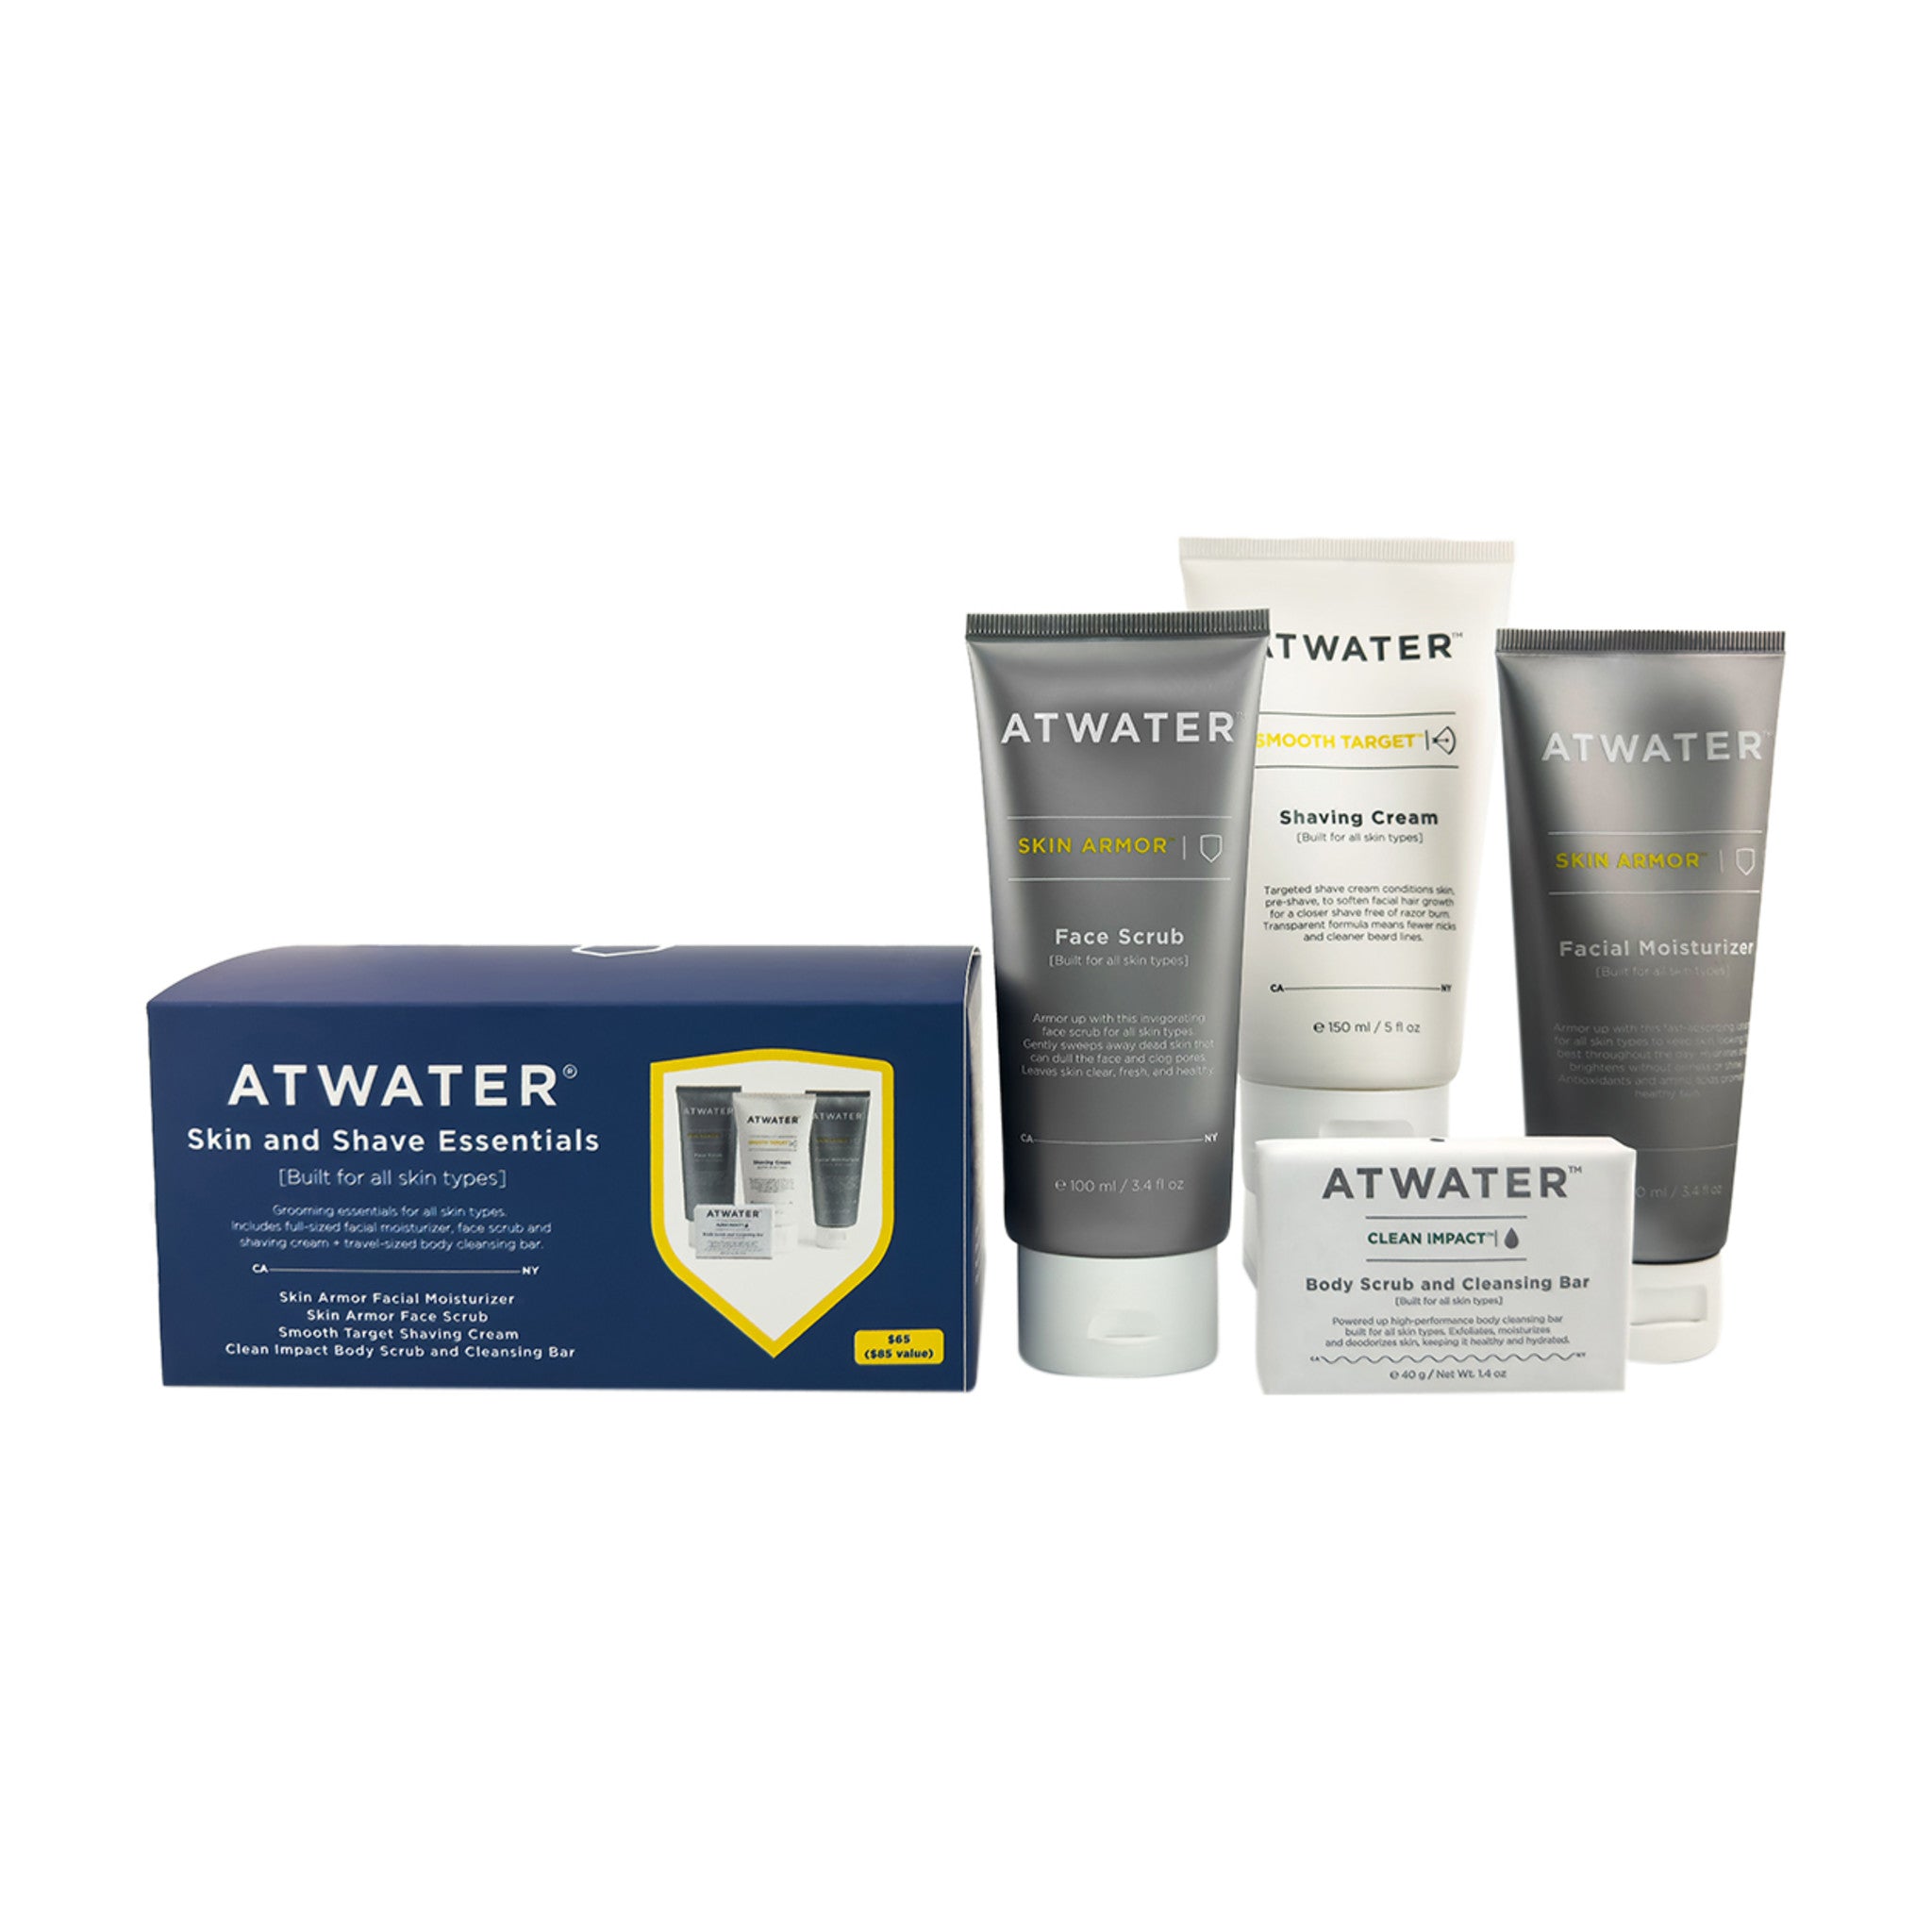 Atwater Skin and Shave Essentials (Limited Edition) main image.